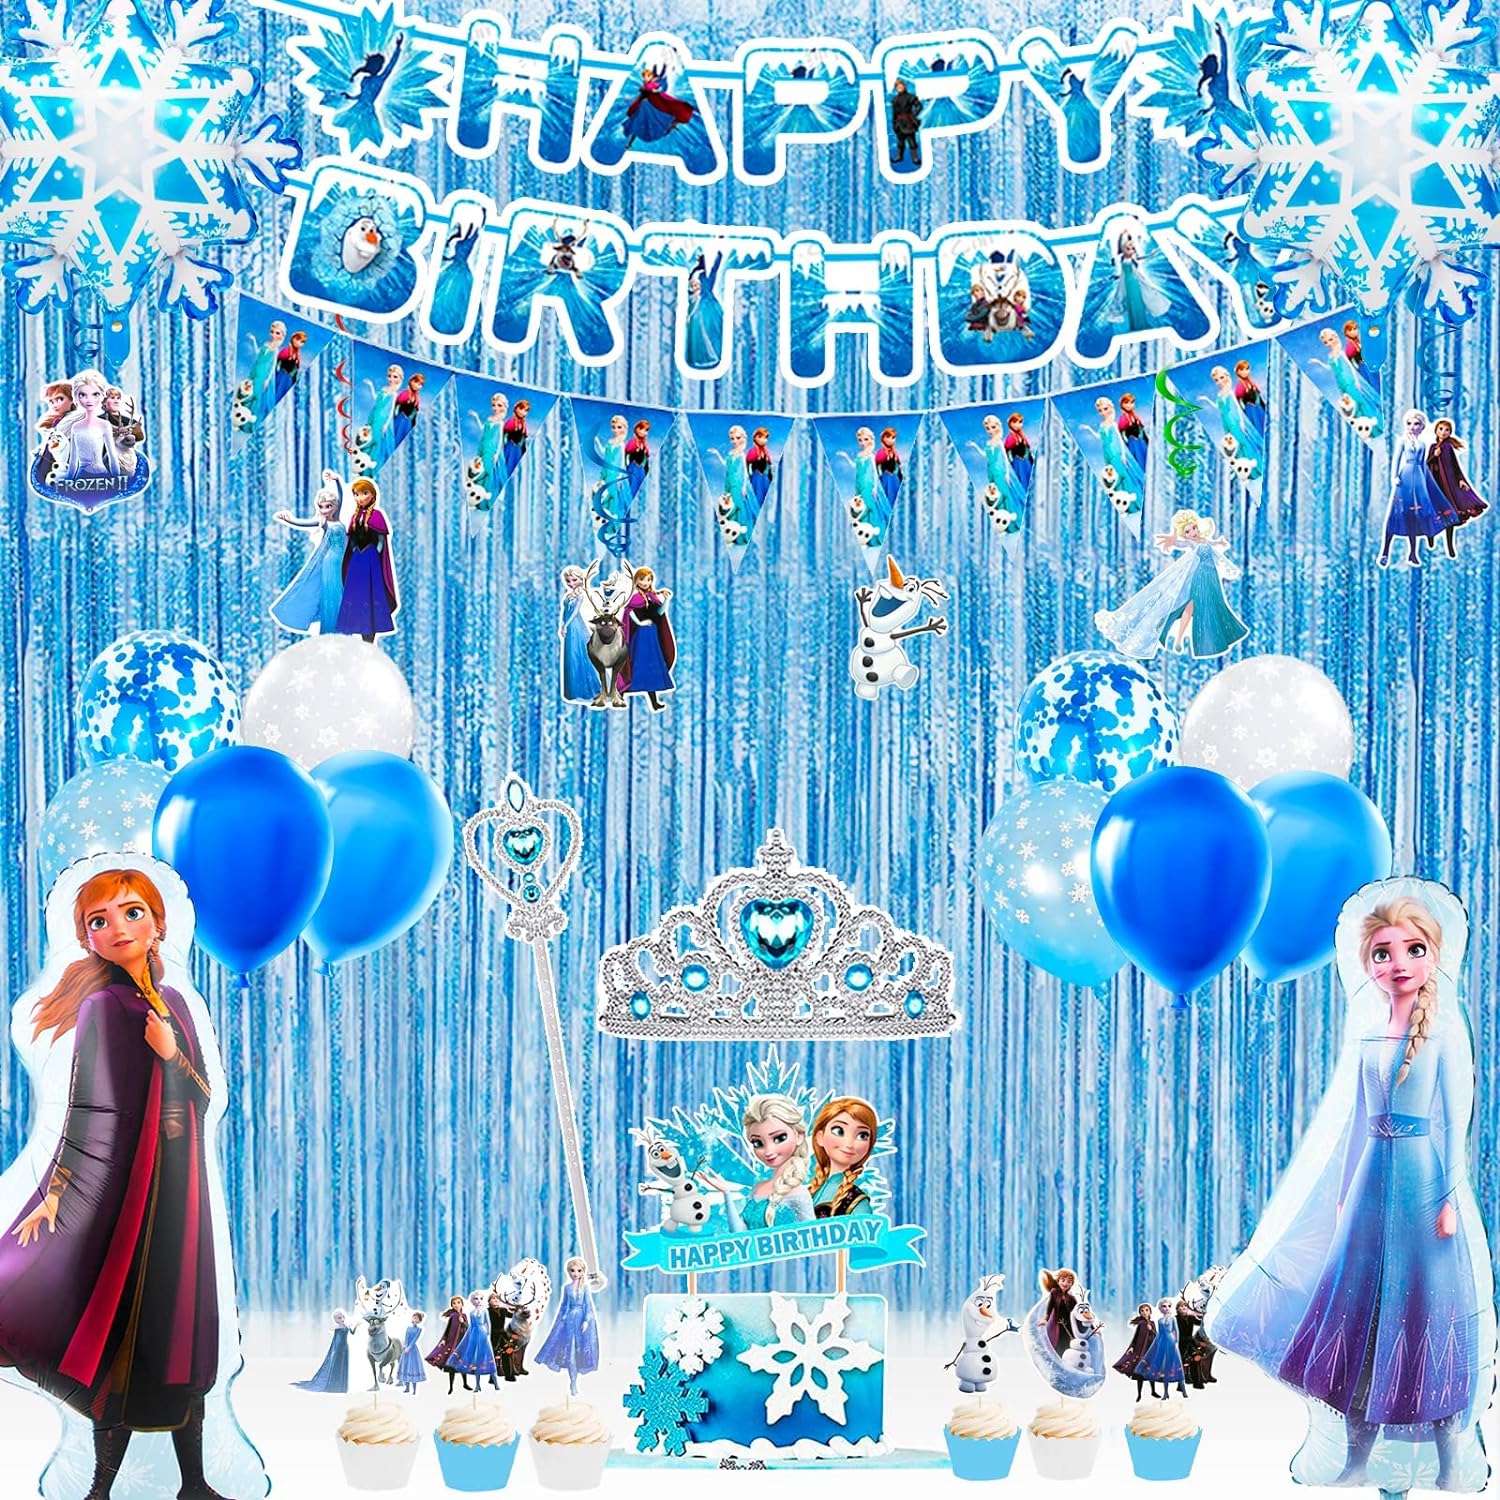 Creating a Magical Disney Frozen Party: Tips and Ideas for a Winter Wonderland Celebration